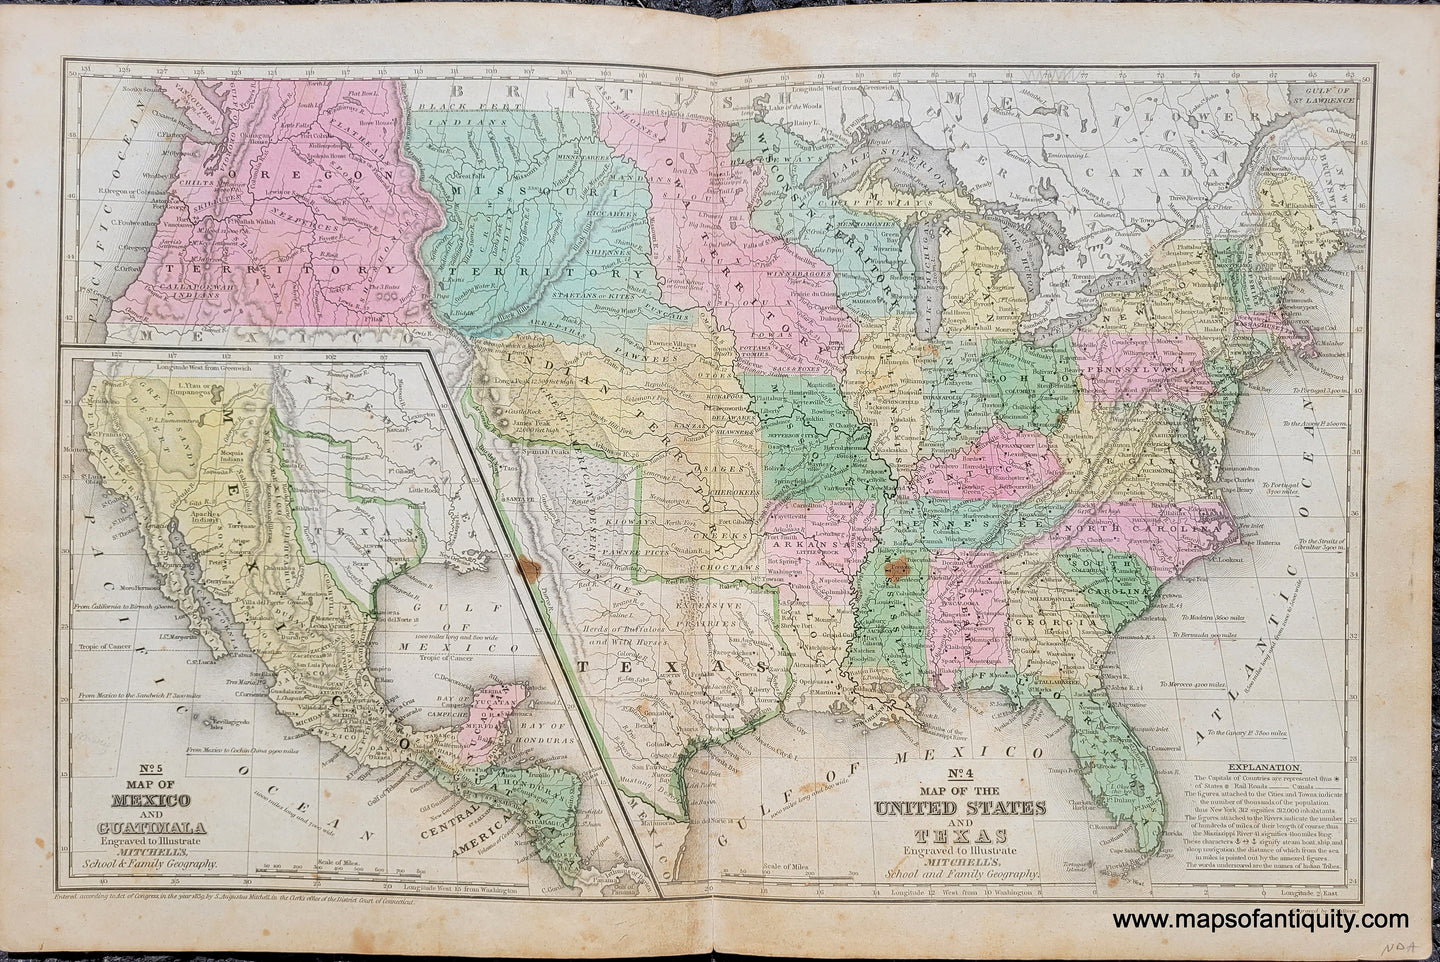 Antique map of the United States from circa 1845 with original hand-coloring. States and territories are colored in antique tones of pink, yellow, blue, and green. Texas has an outline color because it was a republic at this time. An inset map shows Mexico when it owned everything west of the Rio Grande including California. The antique paper has some brown spots near the center and also some other minor spots and stains